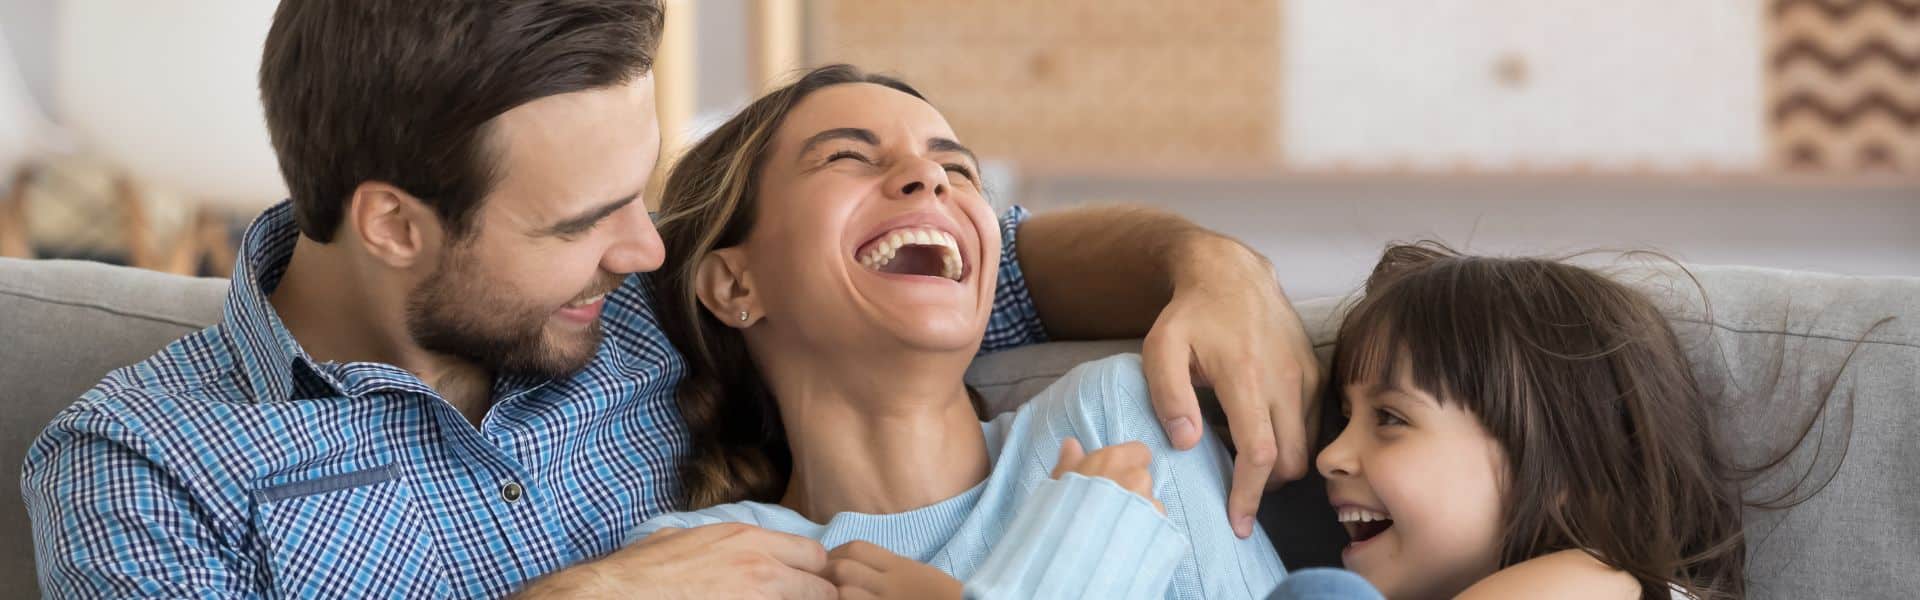 Father and Mother along with child on couch laughing together